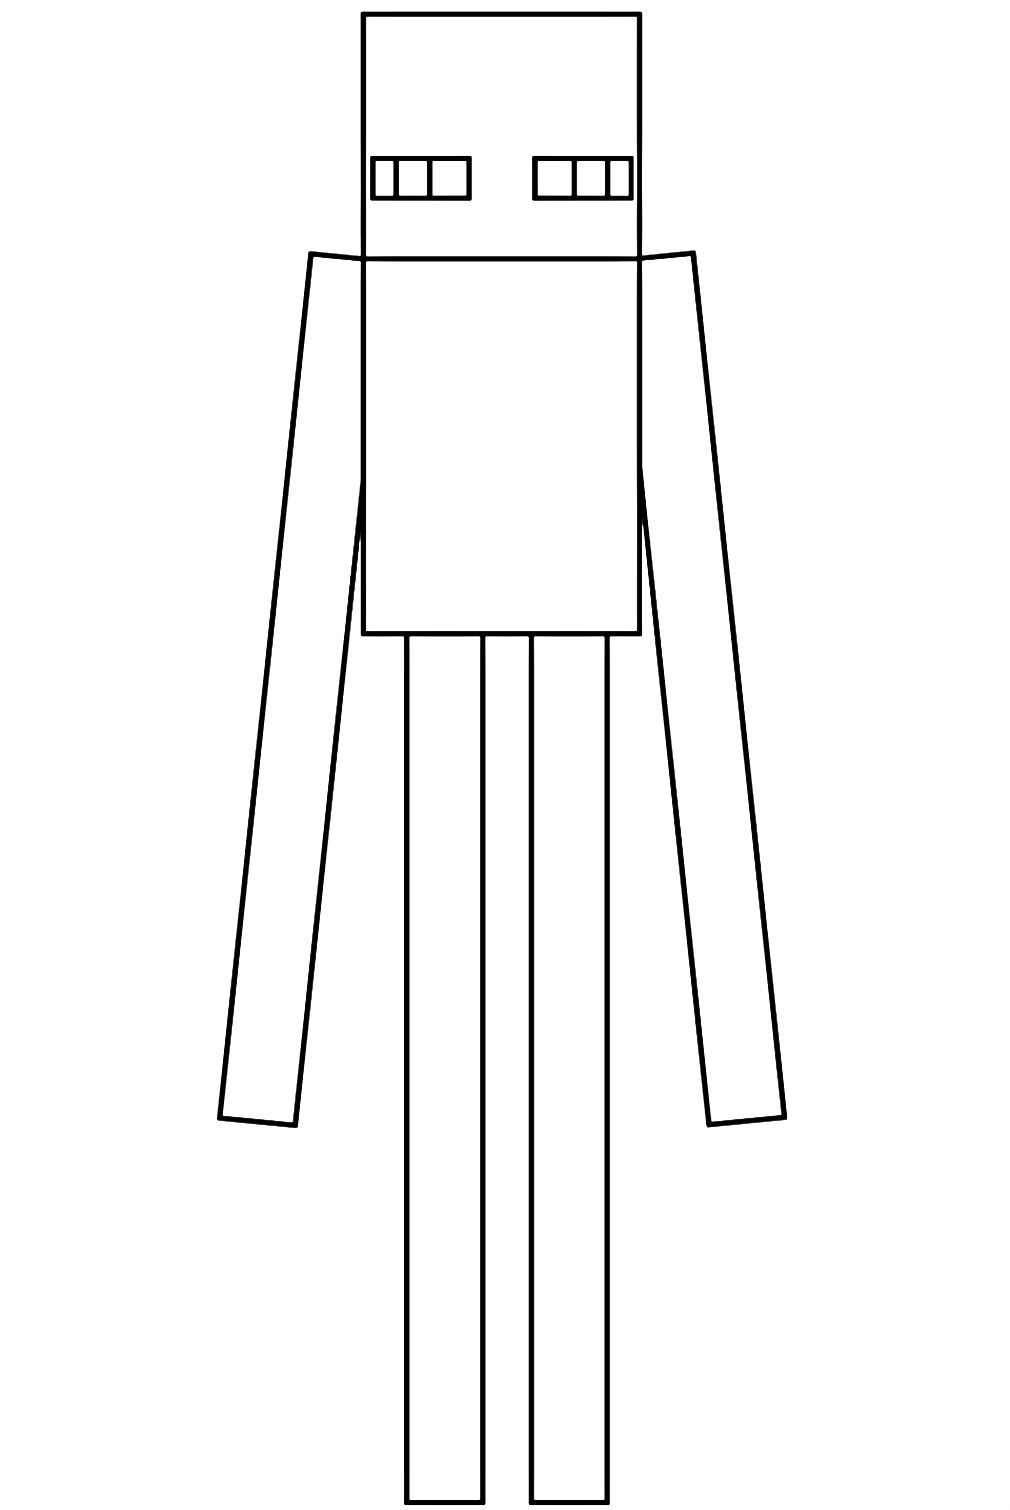 Minecraft Enderman Coloring Pages